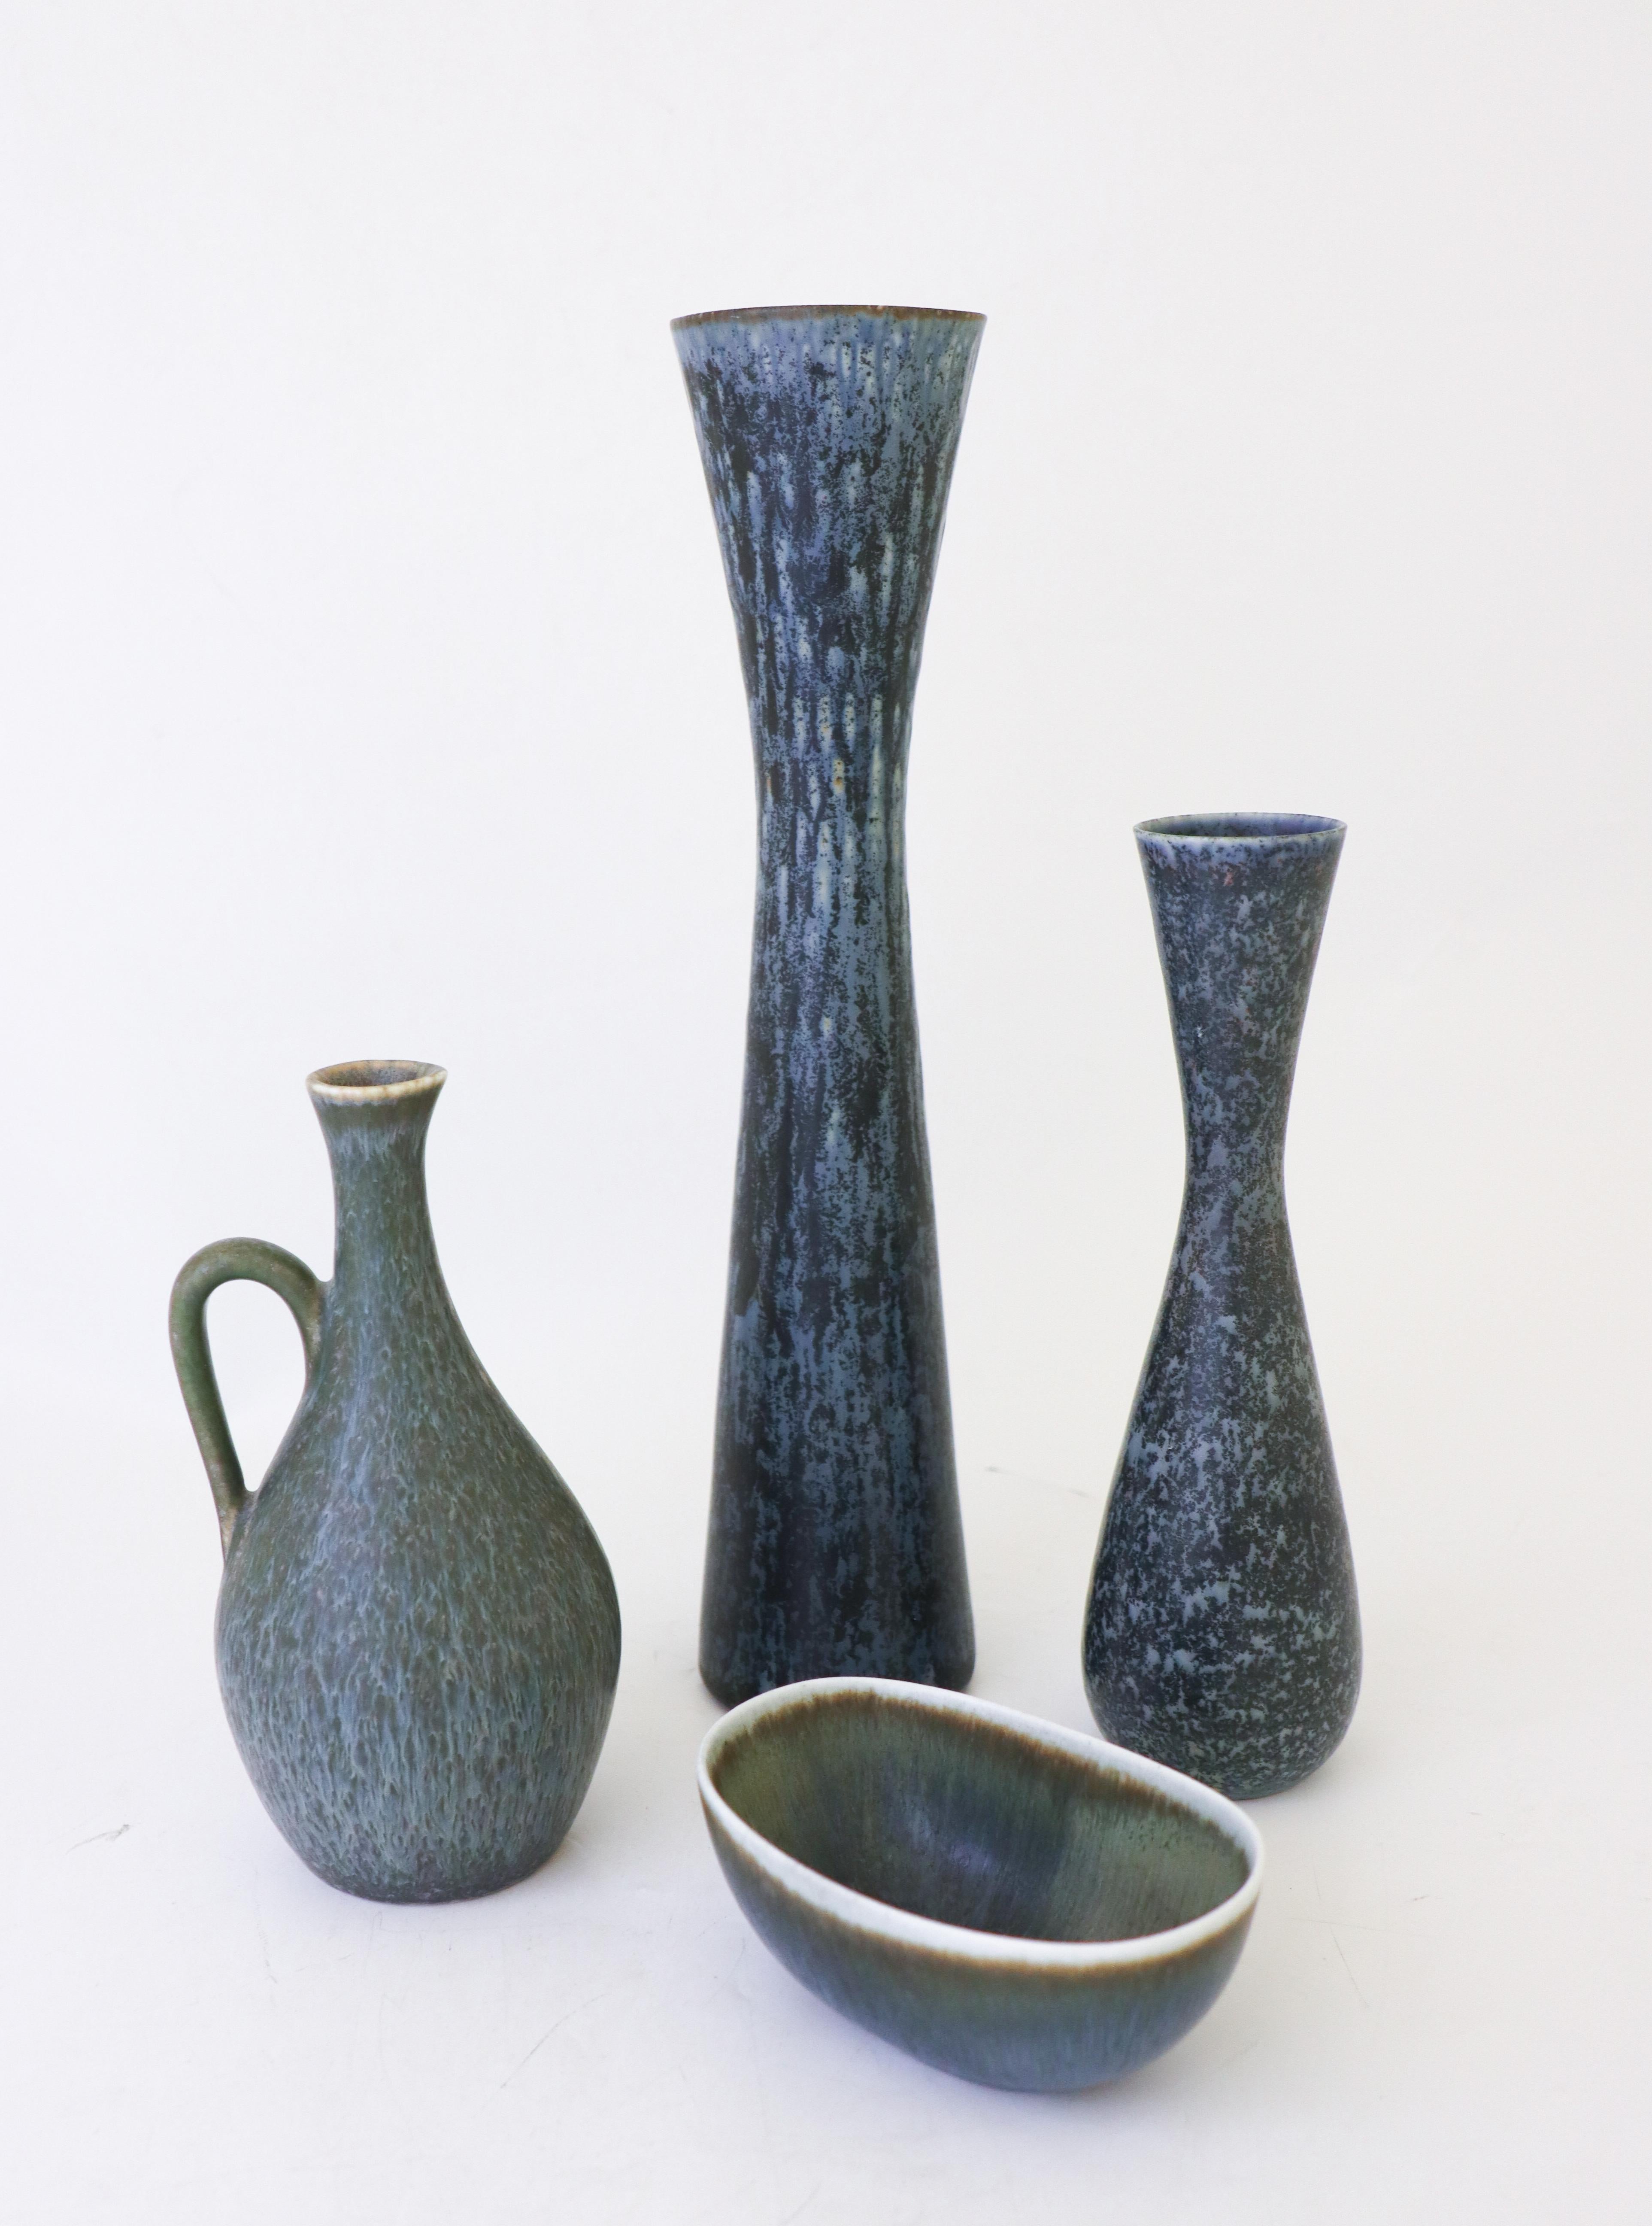 A group of three vases and a bowl designed by Carl-Harry Stålhane at Rörstrand. The vases are 31 cm, 20.5 cm and 17 cm high and the bowl is 11 x 7 cm and in excellent condition. They are all in excellent condition and first quality. 

Carl-Harry